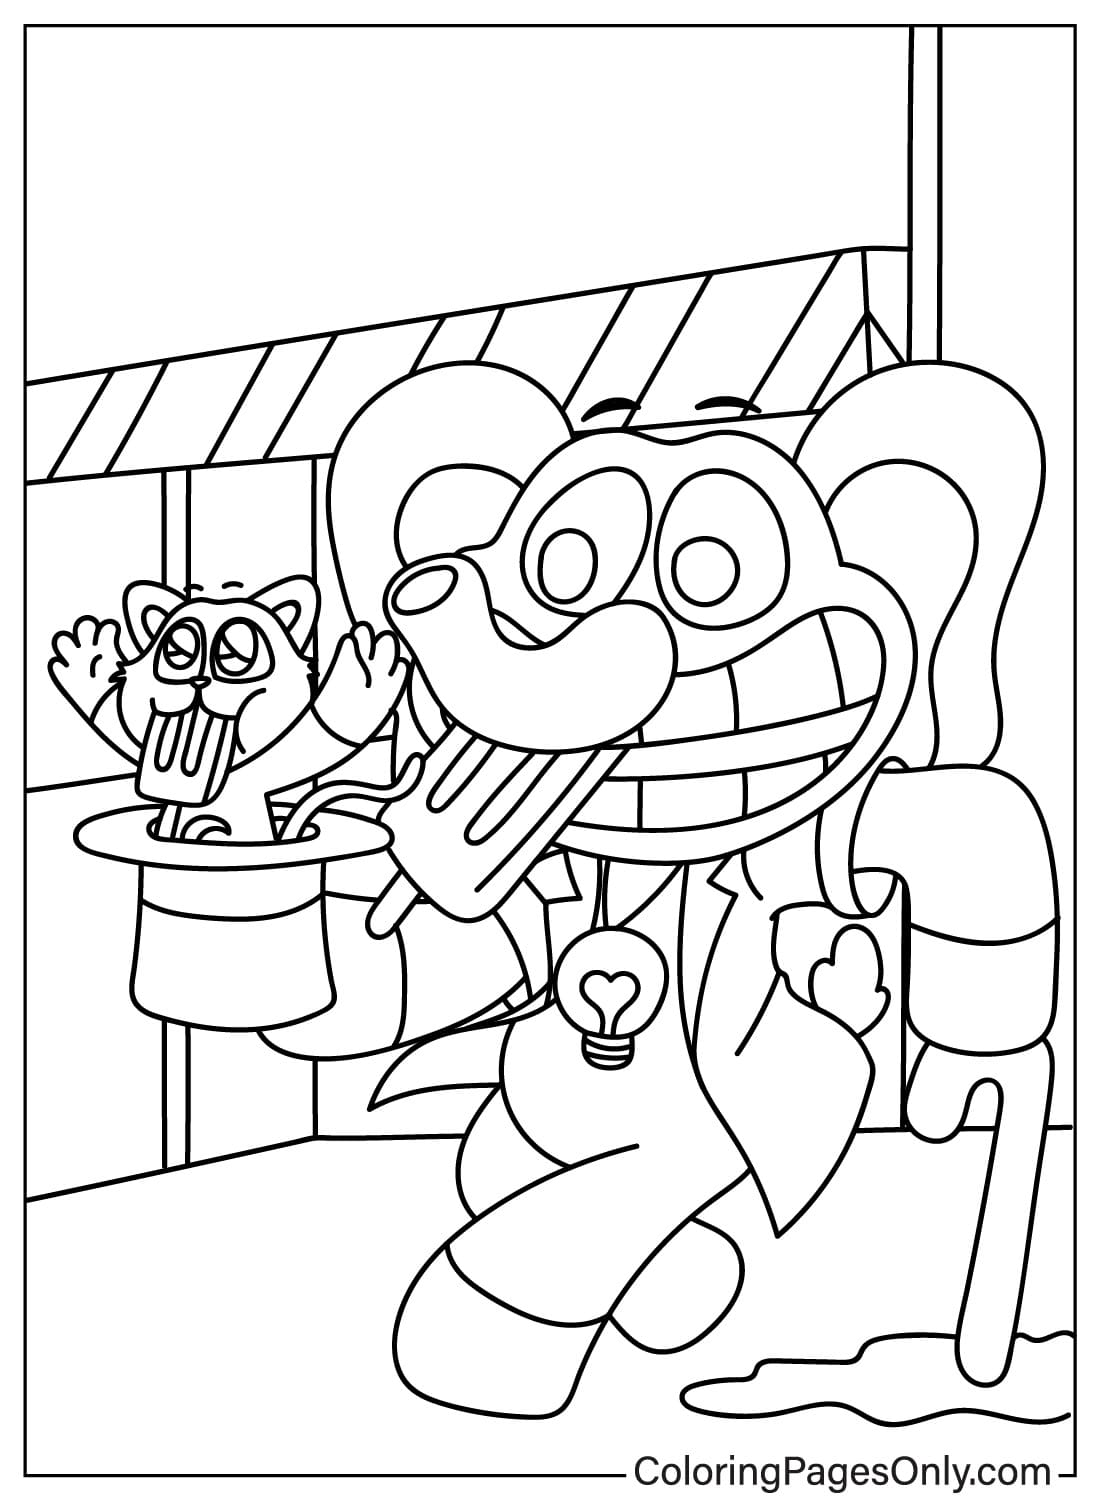 Bubba Bubbaphant and CatNap Coloring Page for Kids from CatNap